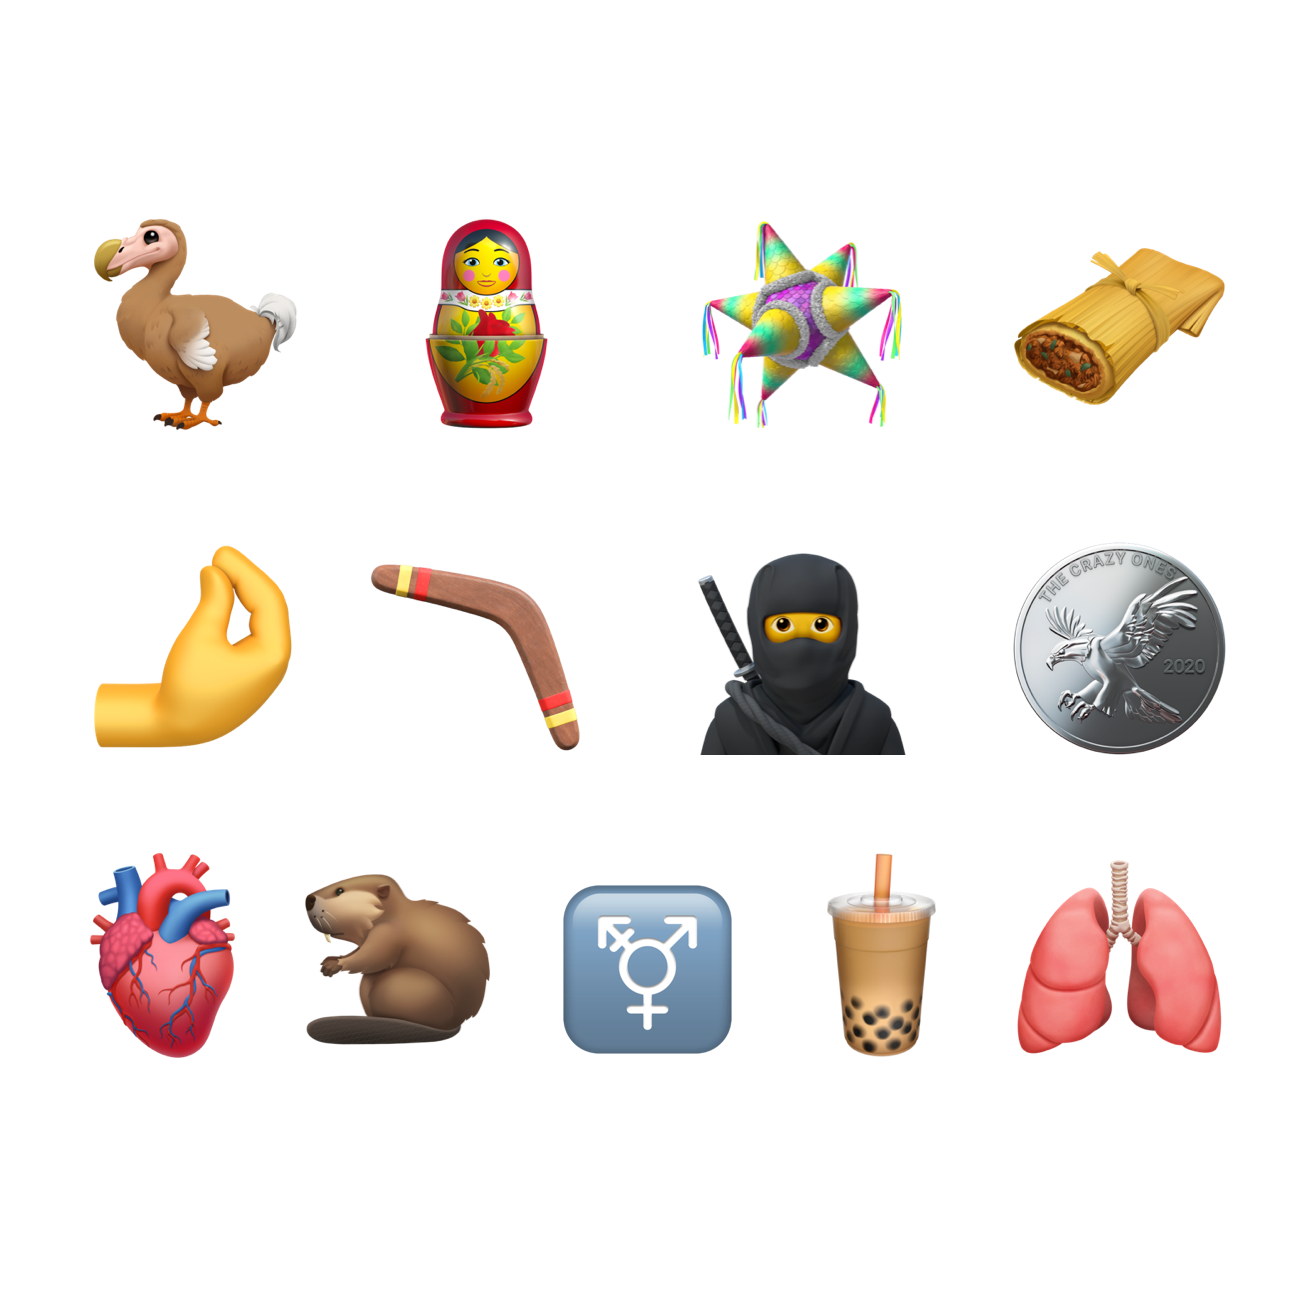 Apple Reveals Some of the New Emoji Characters Coming to iOS 14